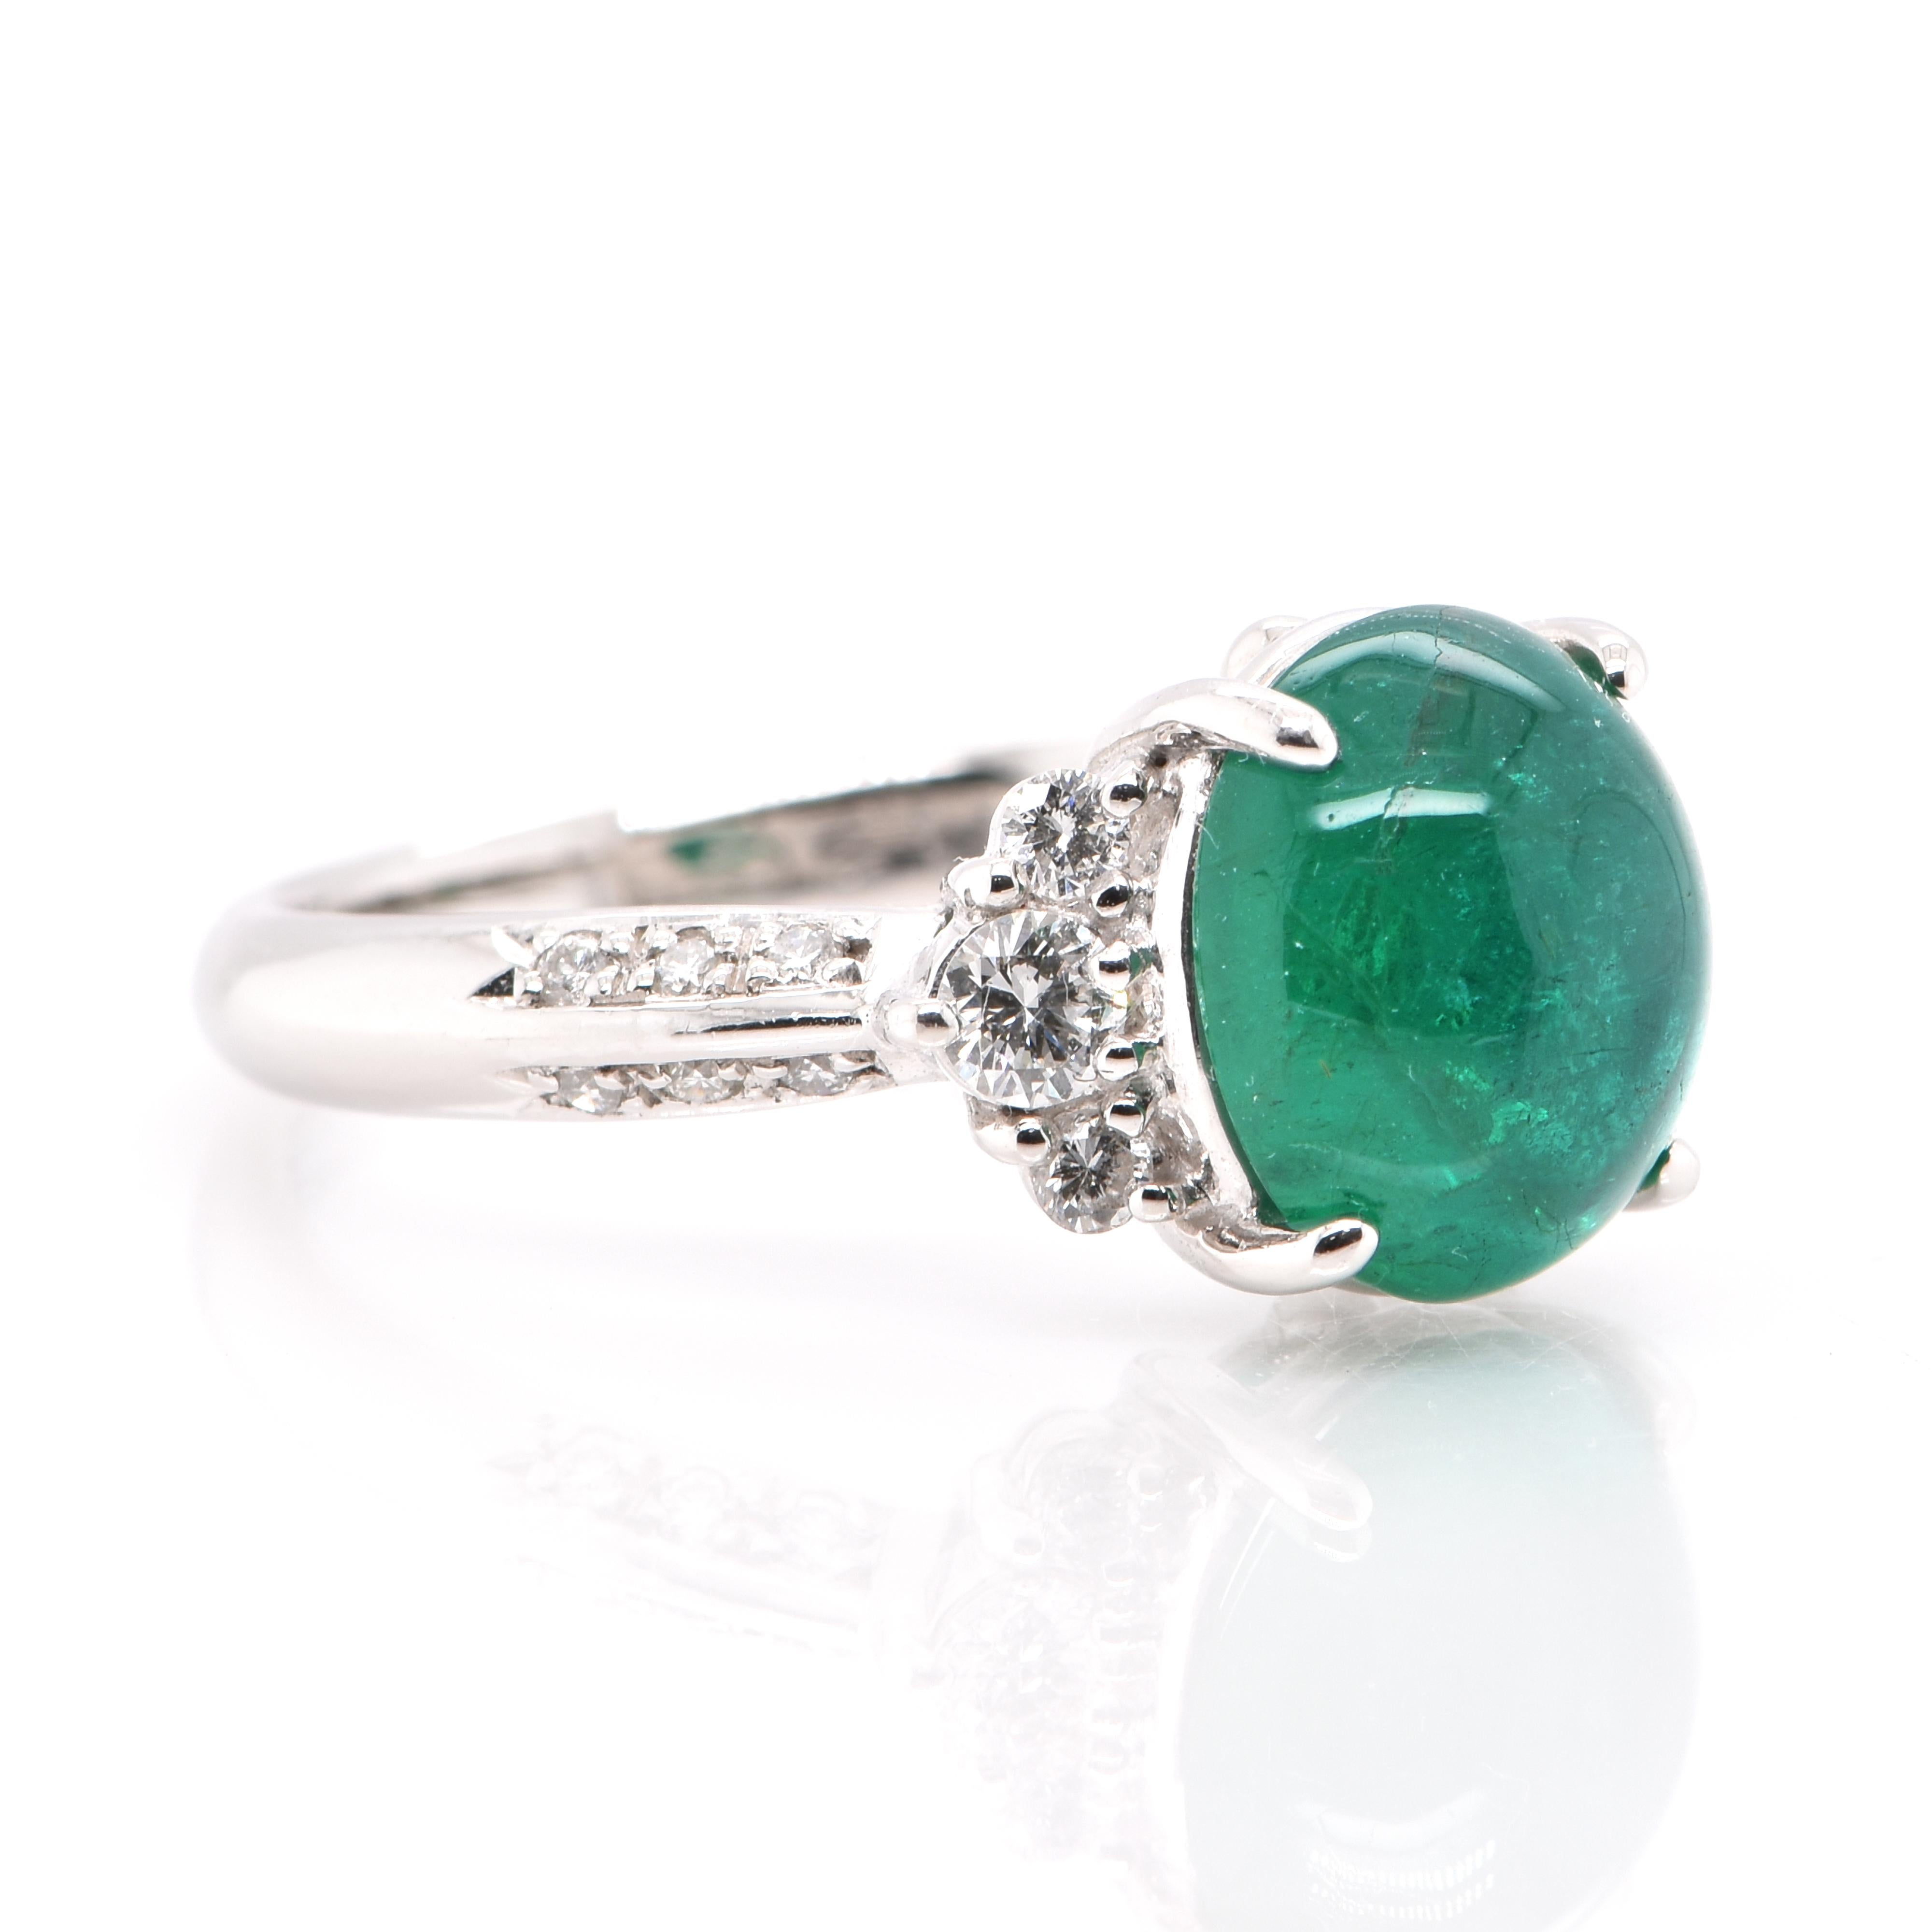 A stunning Ring featuring a 3.97 Carat, Natural, Colombian Emerald Cabochon and 0.45 Carats of Diamond Accents set in Platinum. People have admired emerald’s green for thousands of years. Emeralds have always been associated with the lushest